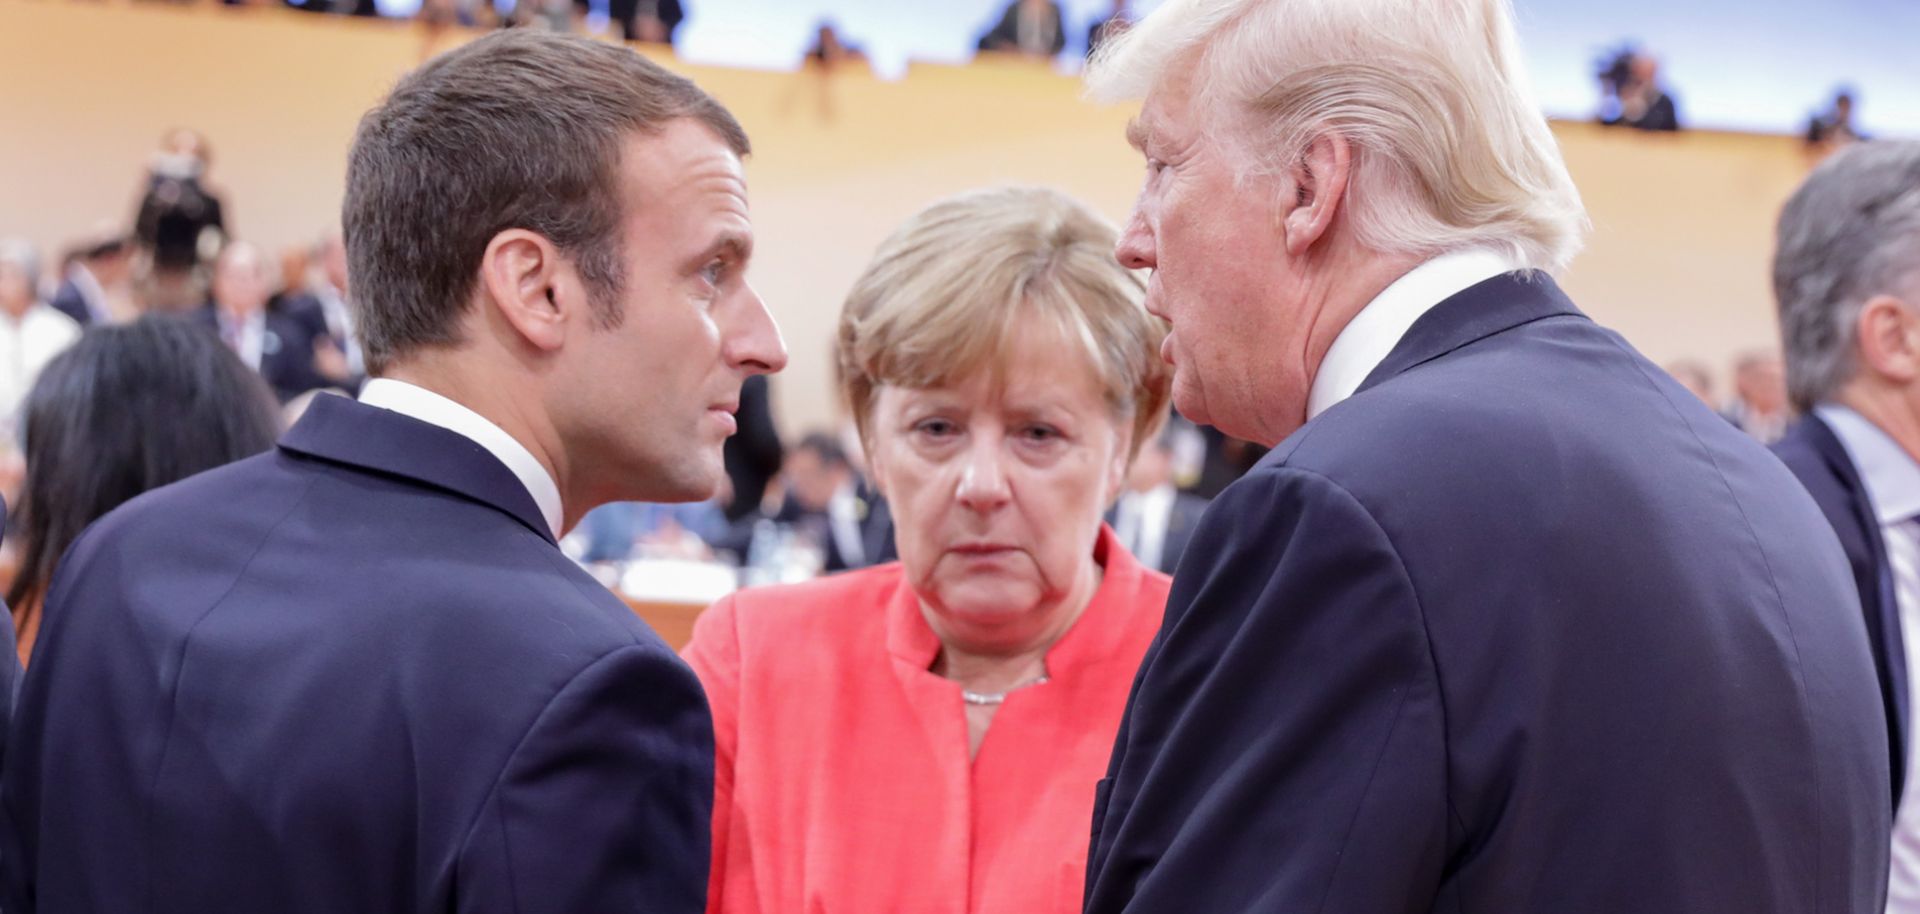 German Chancellor Angela Merkel talks with U.S. President Donald Trump and French President Emmanuel Macron at a G-20 meeting in Hamburg, Germany, in July 2017.